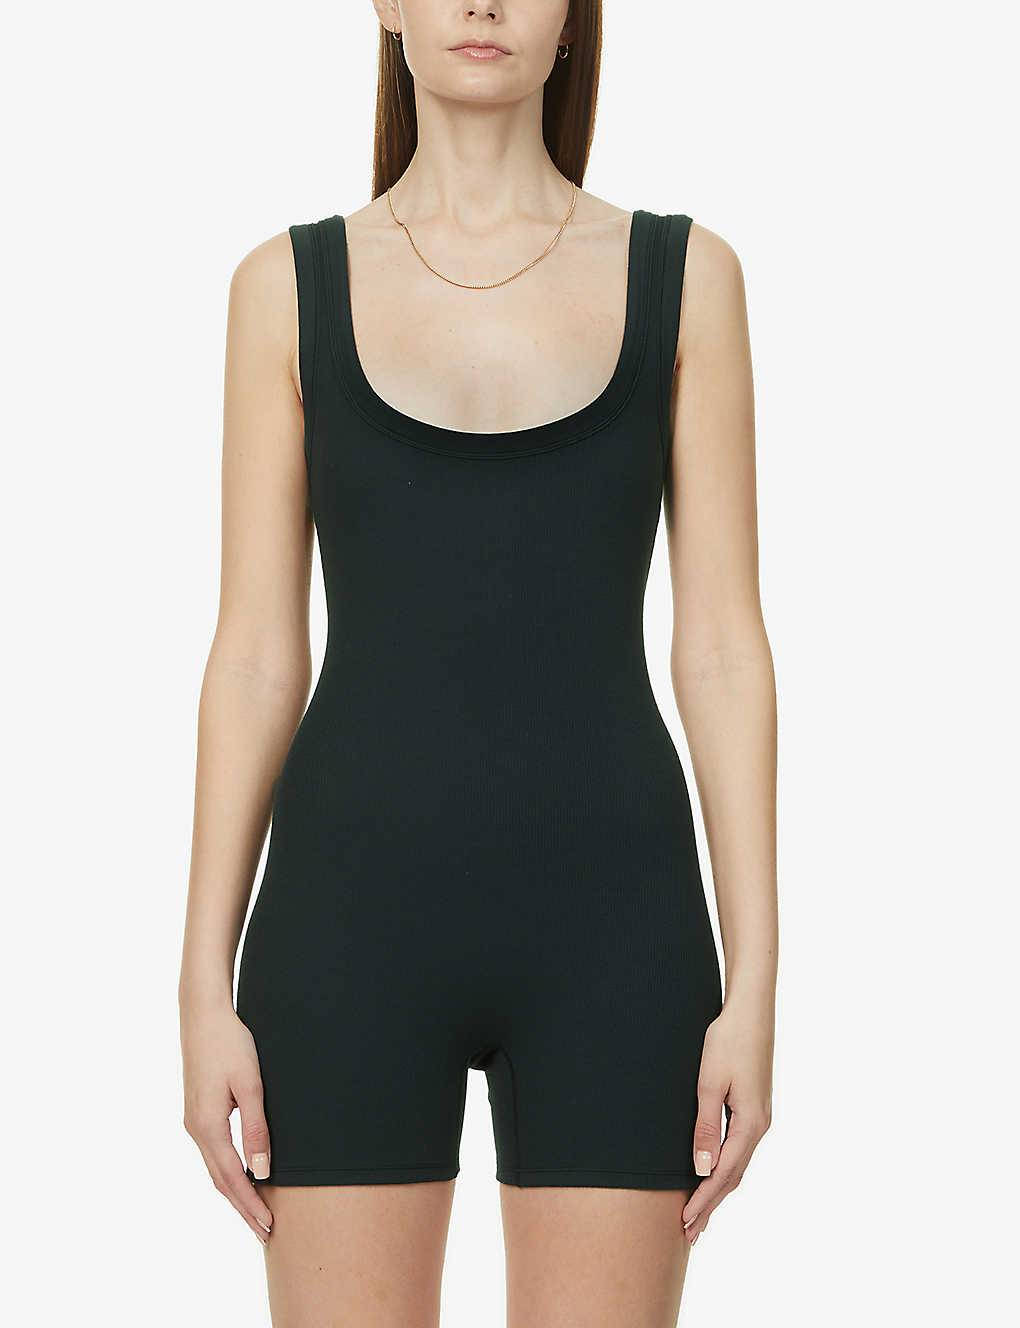 https://cms-cdn.thesolesupplier.co.uk/2023/06/skims-slim-fit-ribbed-stretch-cotton-playsuit-soot-front.jpg